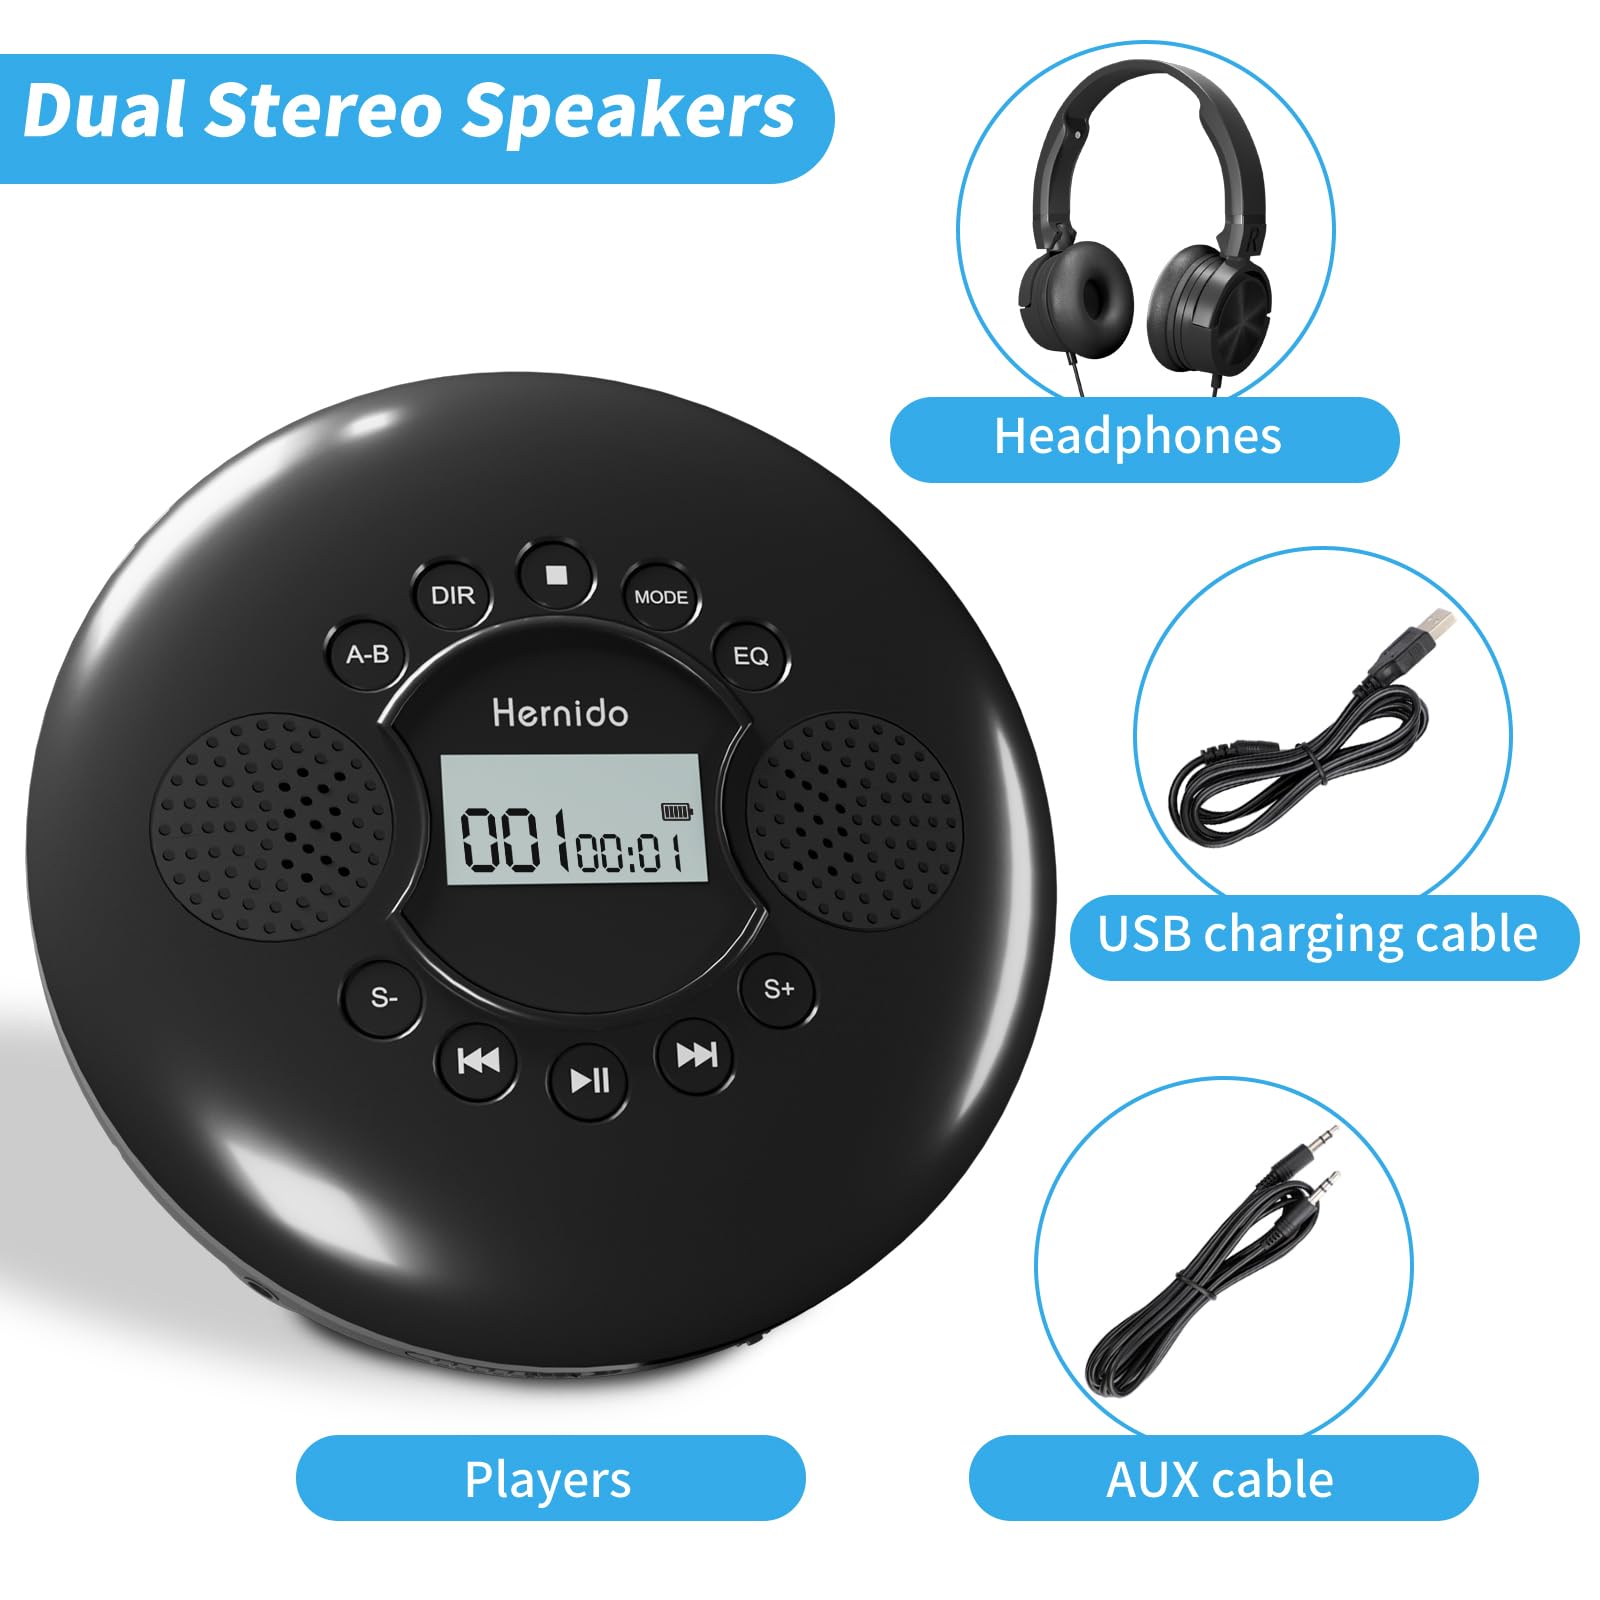 CD Player Portable, Hernido Portable CD Player for Car with Stereo Speakers, Rechargeable Walkman CD Player with Headphone, AUX, USB, Anti-Skip/Shockproof Discman for Home/Traval